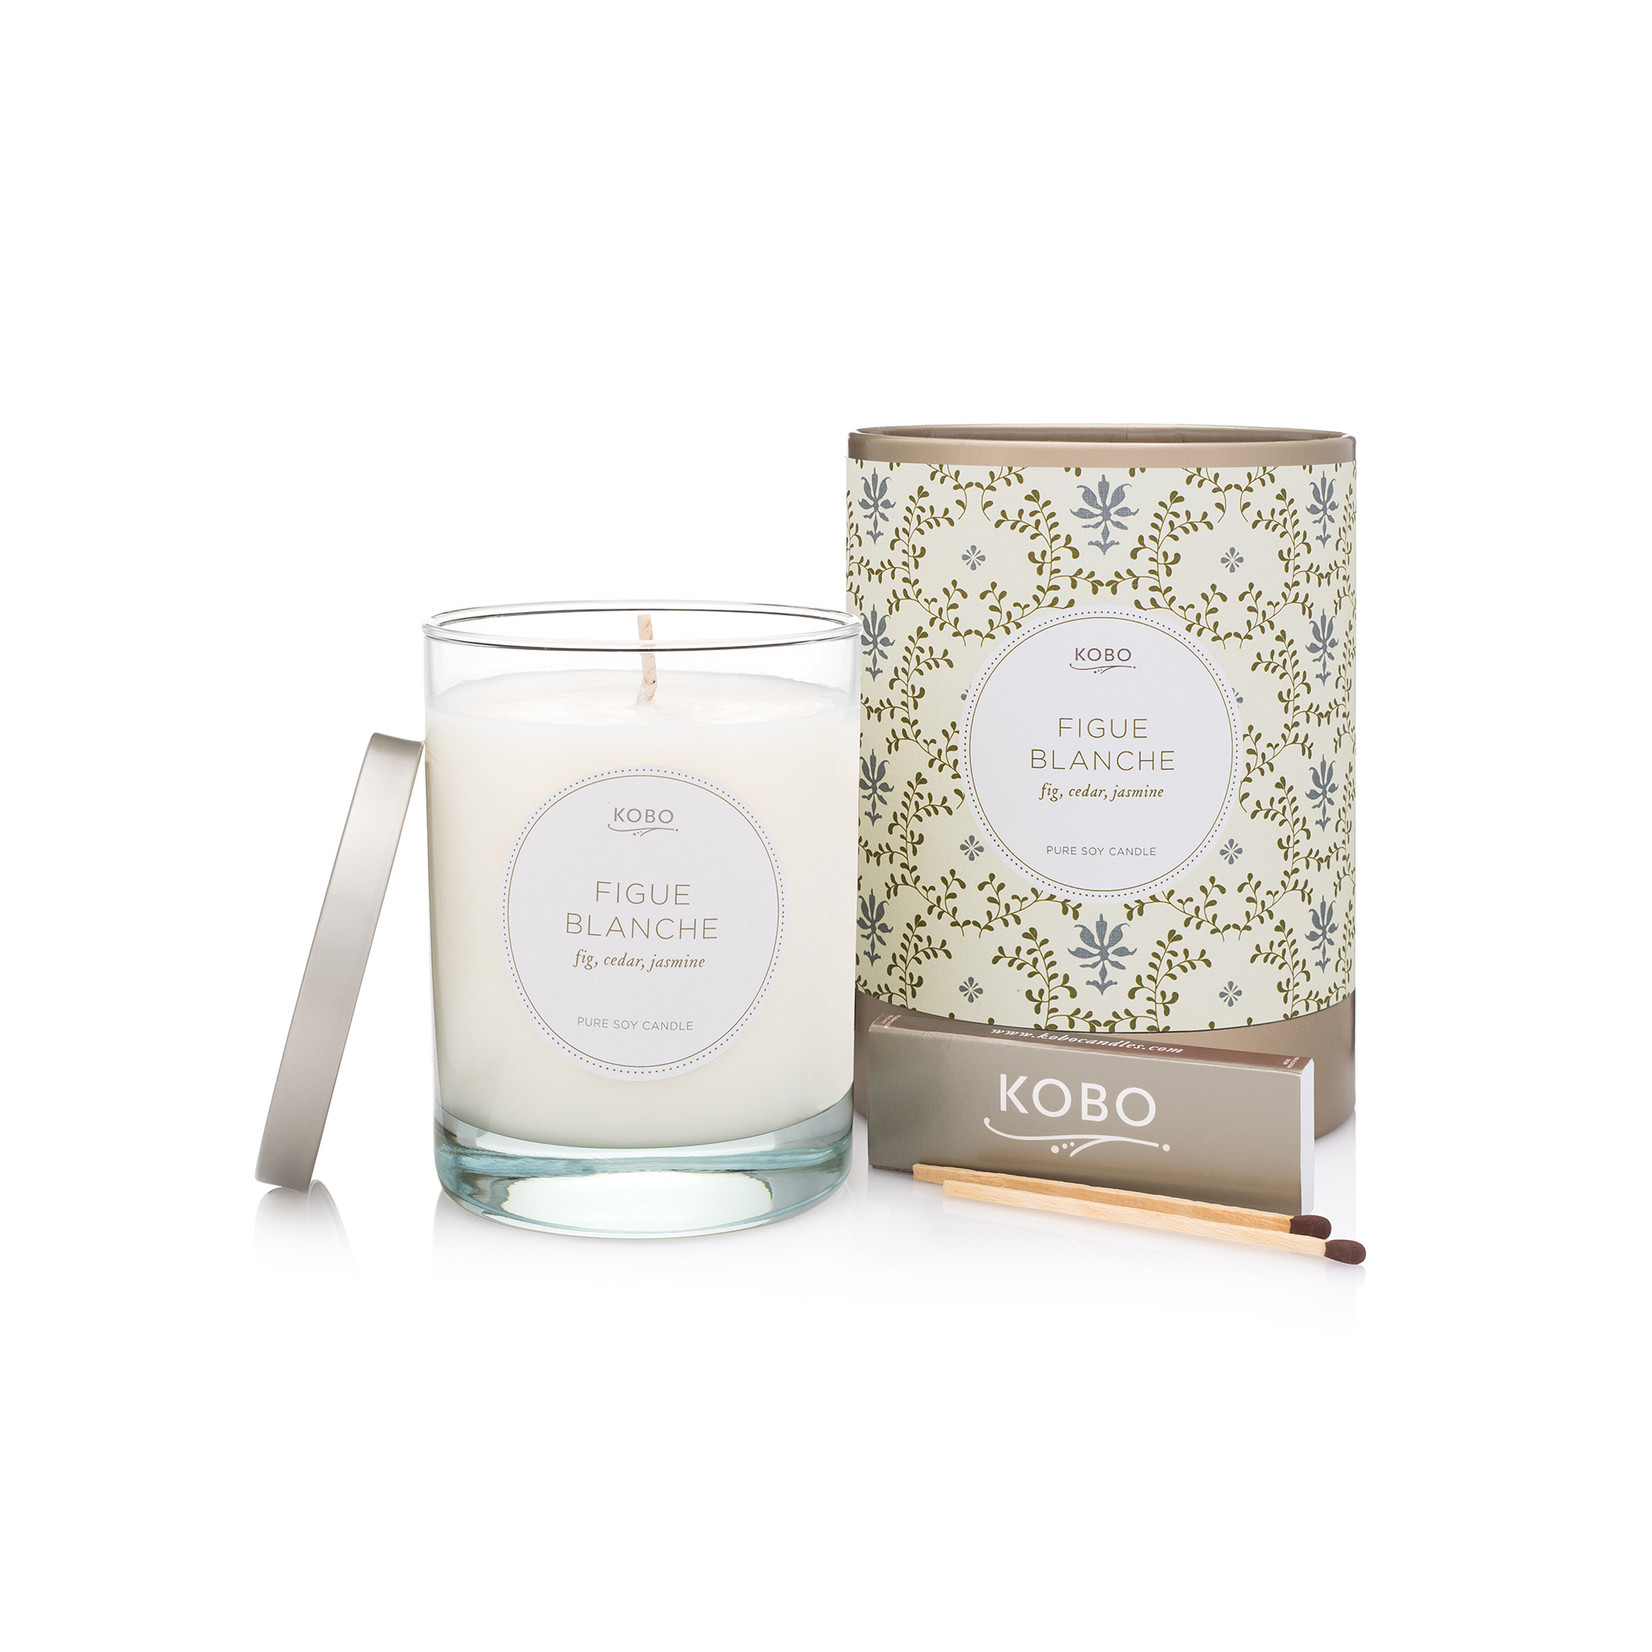 Kobo Figue Blanche Candle